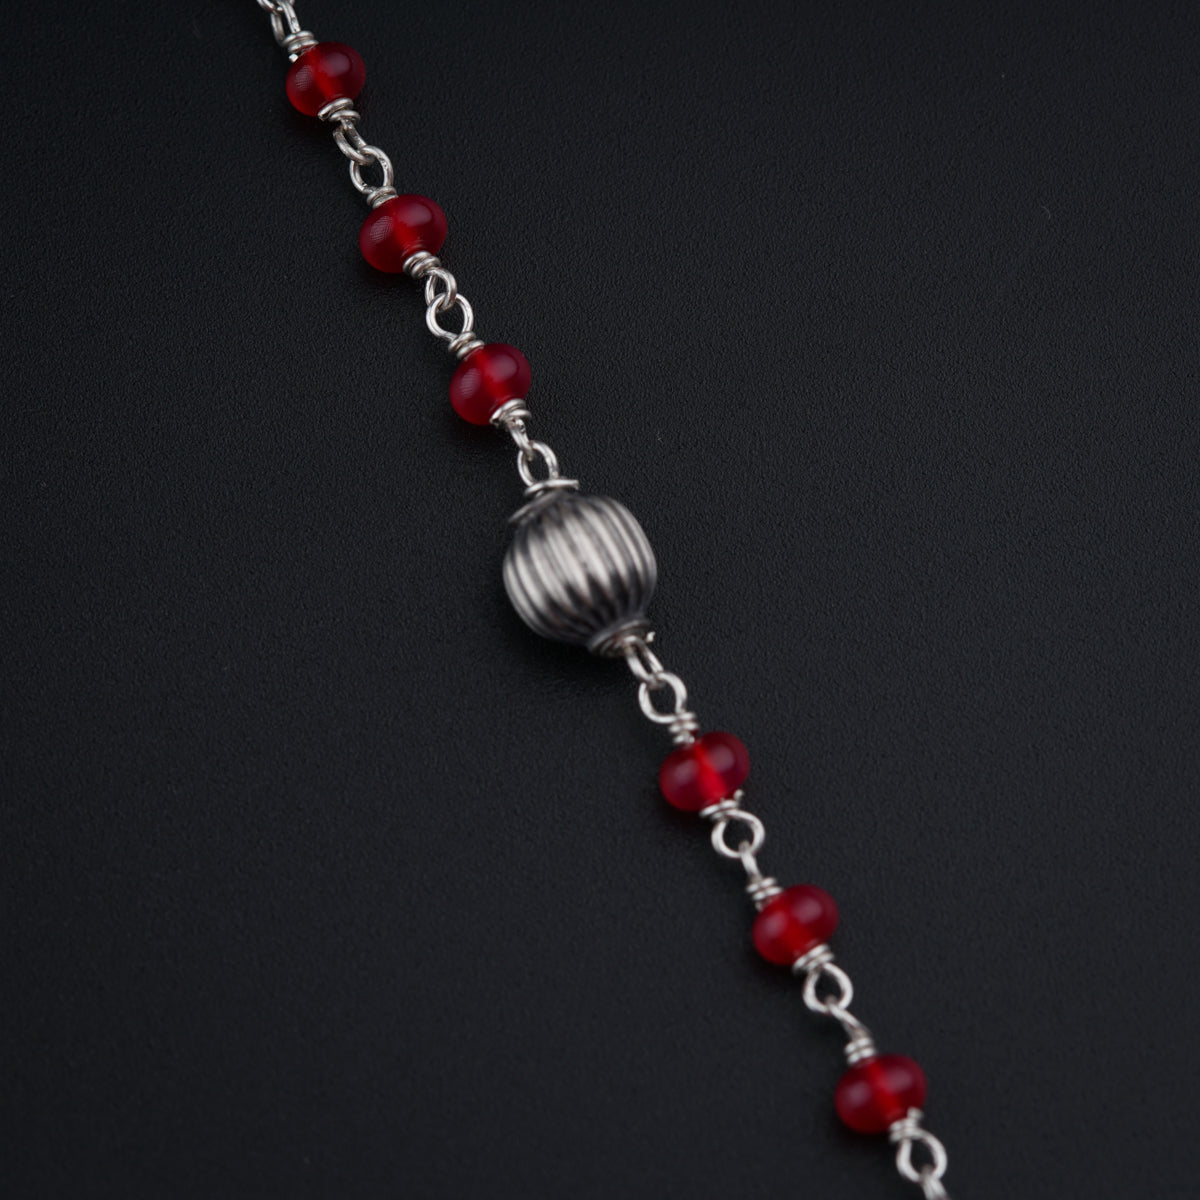 Moonlit Sky Necklace with Rubies